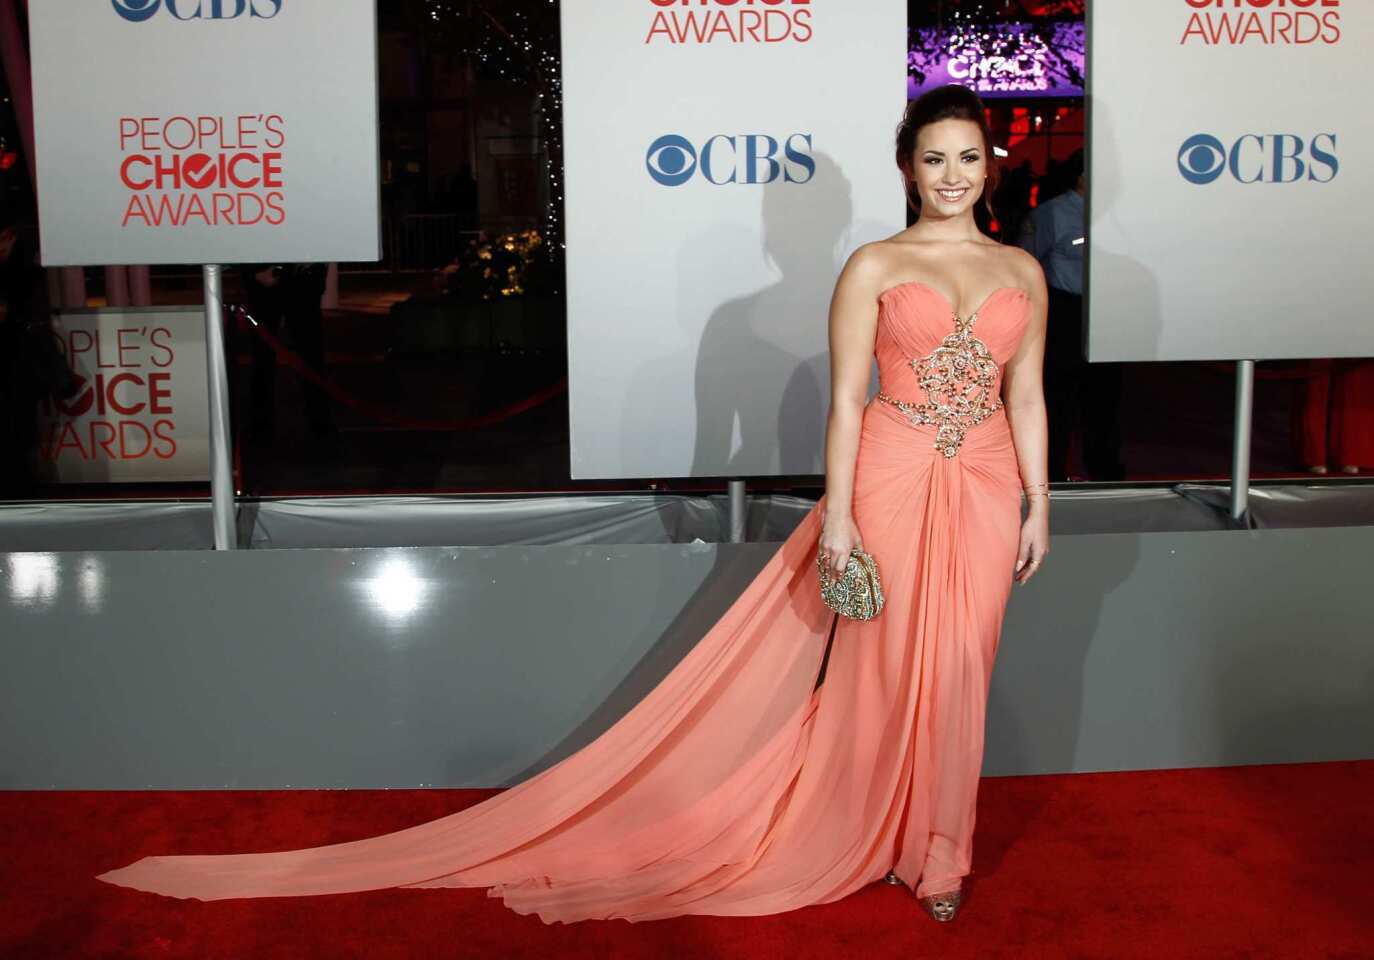 Demi Lovato in a peach Marchesa gown that looked better suited to "Dancing With the Stars" than an awards show red carpet.